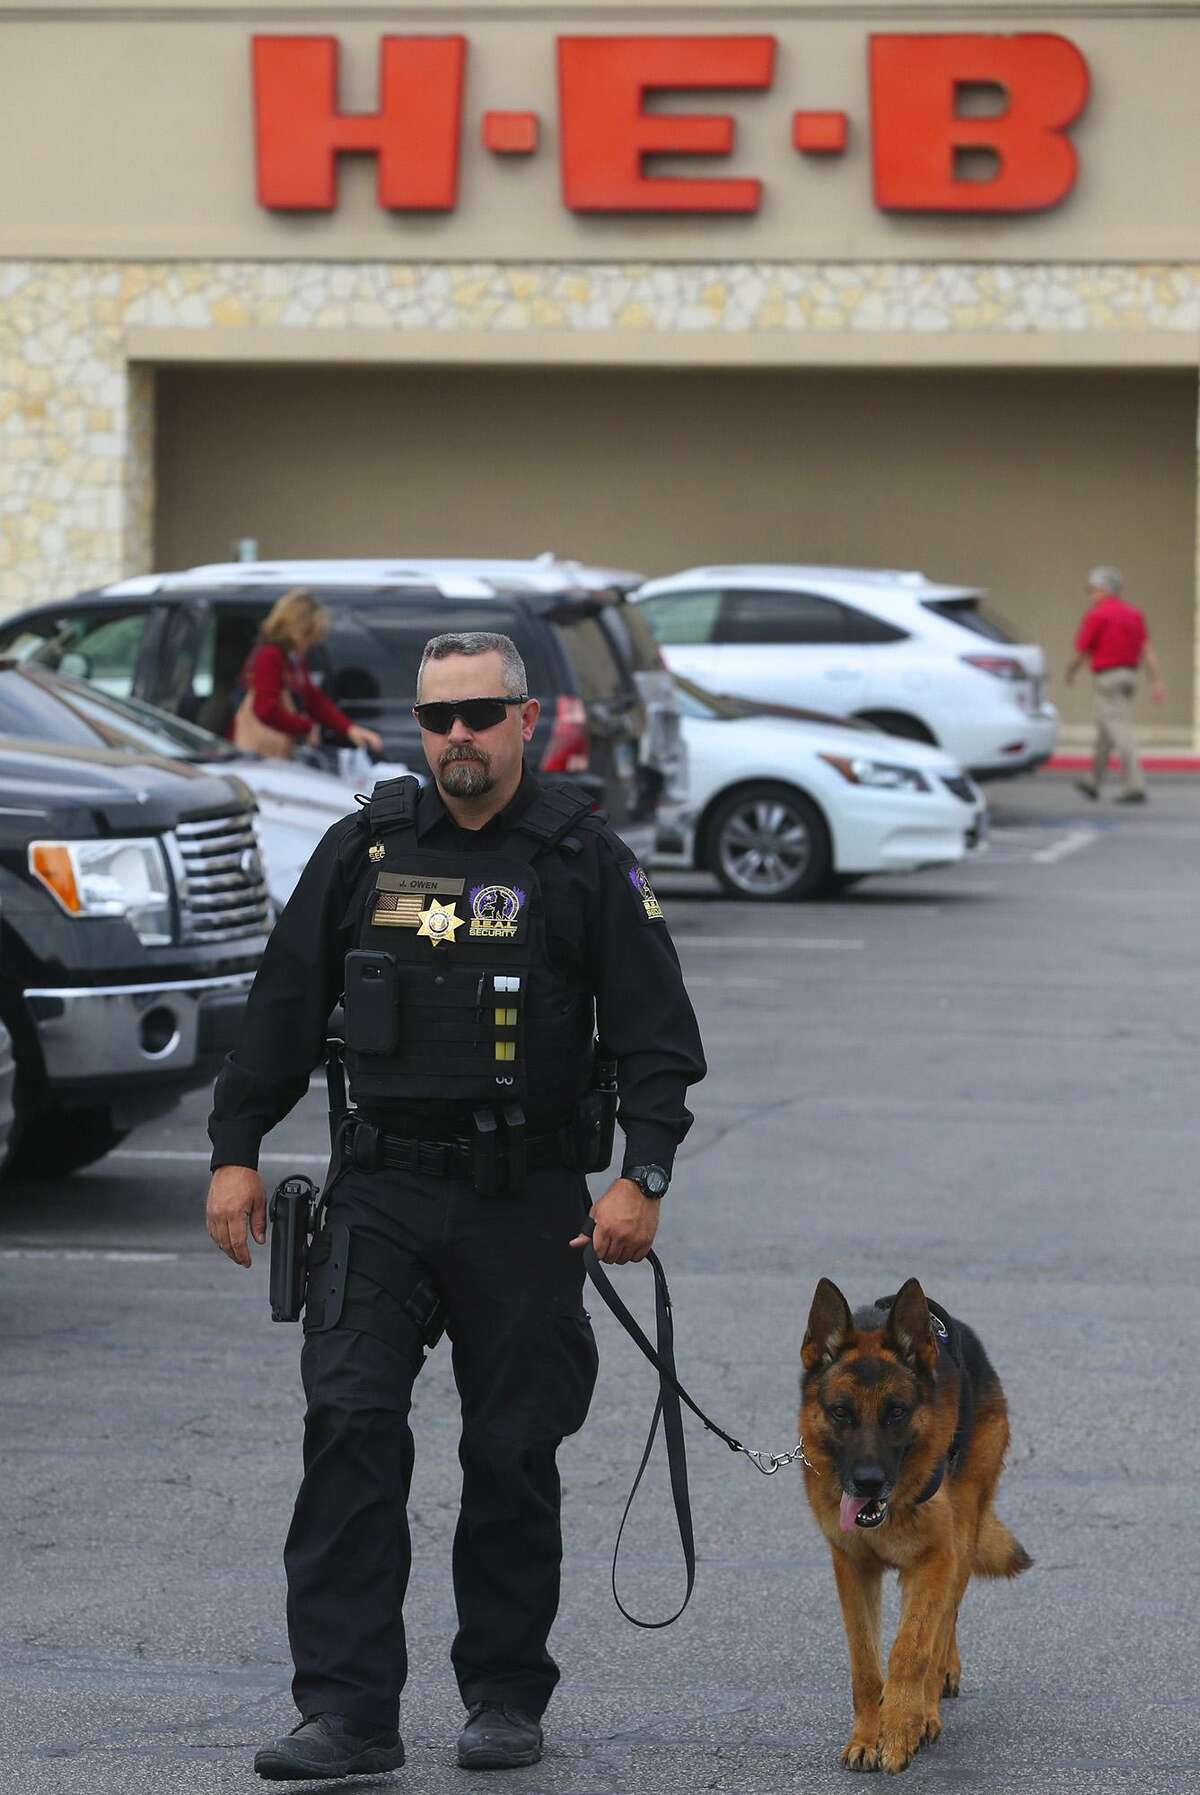 Security officer Justin Owen patrols Monday February 6, 2017 at the H-E-B Lincoln Heights store with a S.E.A.L. Security canine officer "Fak" (right). H-E-B is bringing canine security officers to seven stores in the San Antonio area as part of a partnership with Houston-based S.E.A.L. Security Solutions.